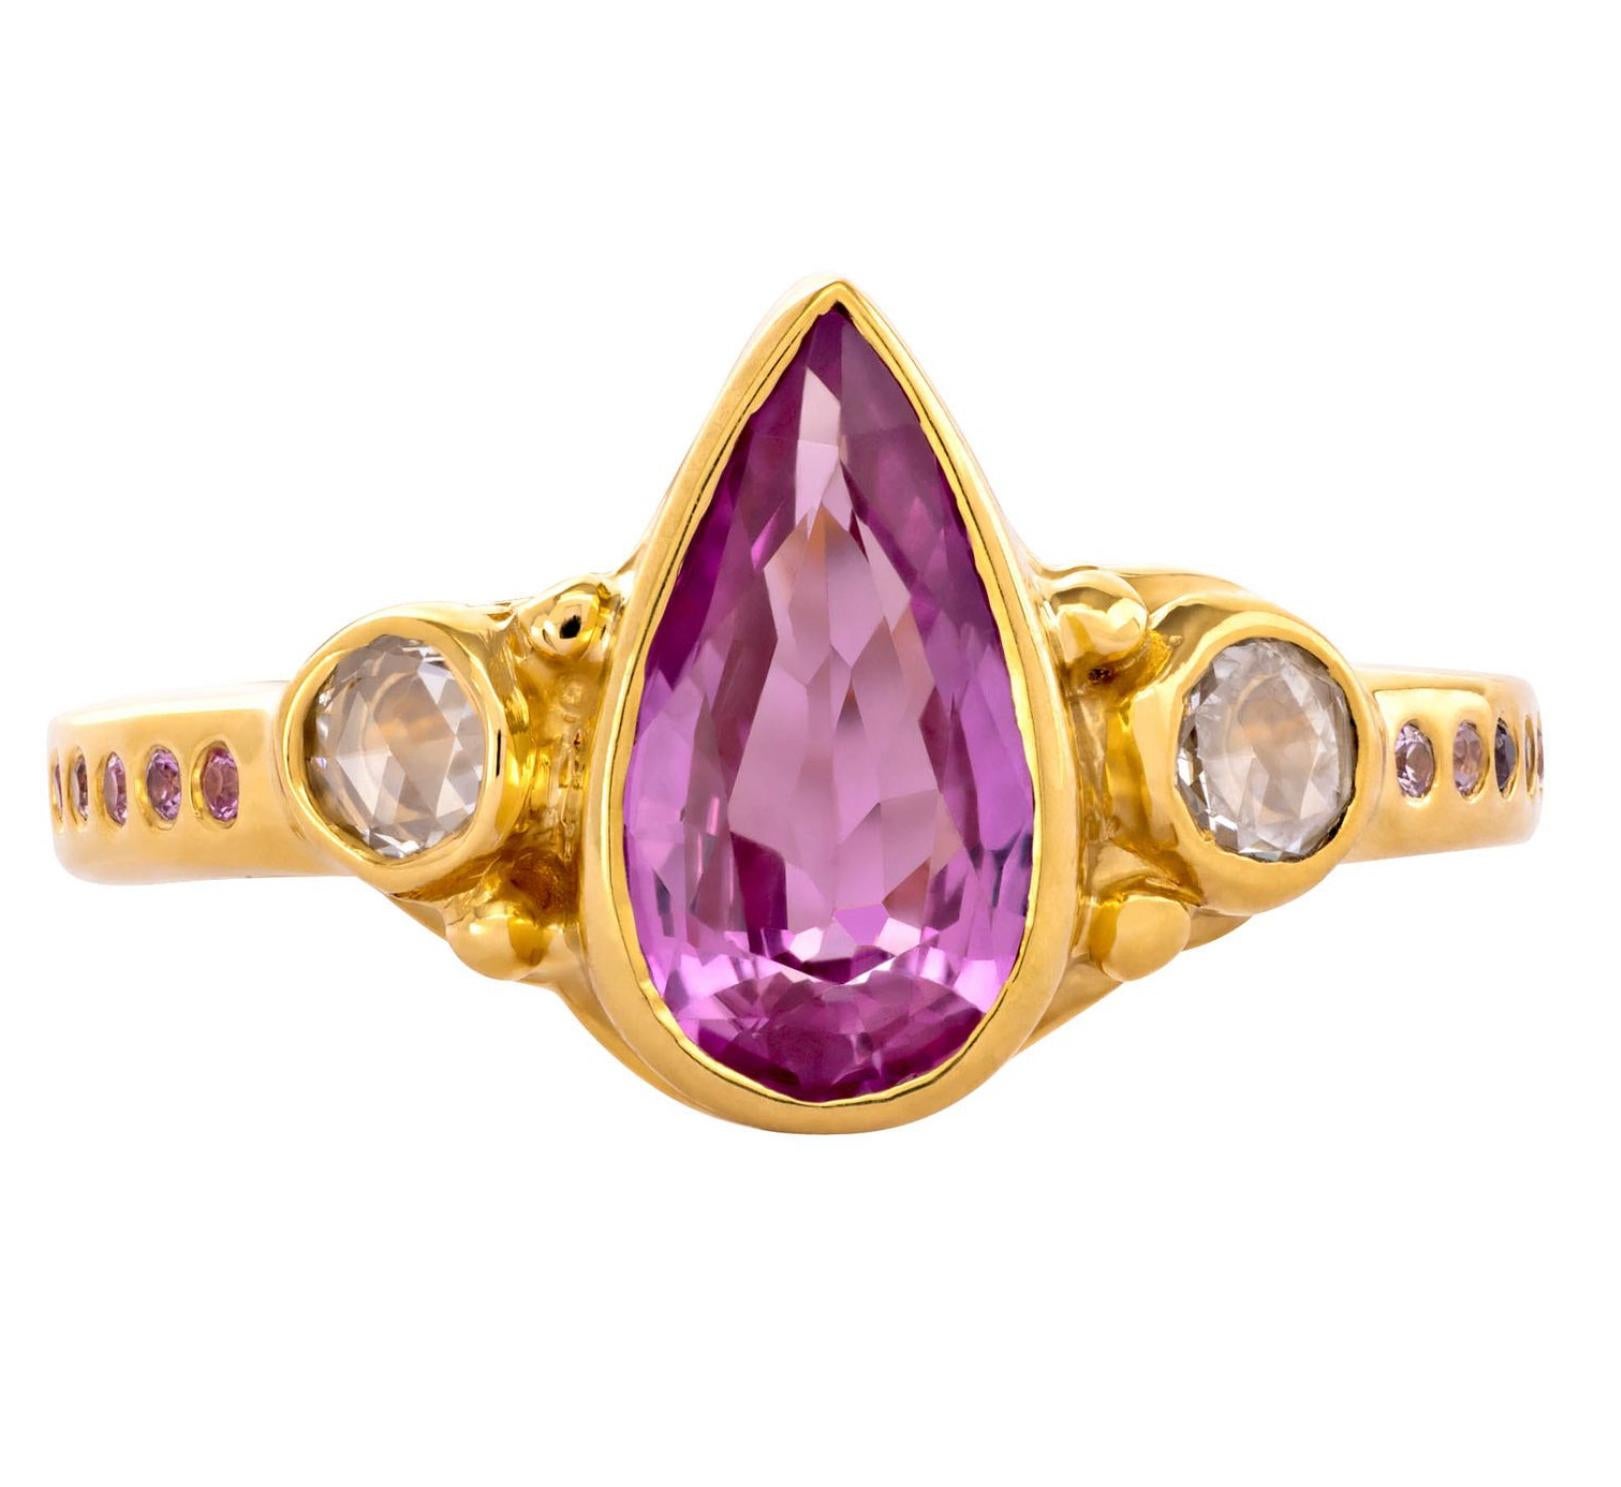 From the Tale of Five Rings Collection, this 22K gold ring has a stunning 2.35 carat pink - pear shaped sapphire center stone with 3mm rose cut side diamonds and 1mm pink sapphires surrounding the band. This ring is completely hand crafted and hand